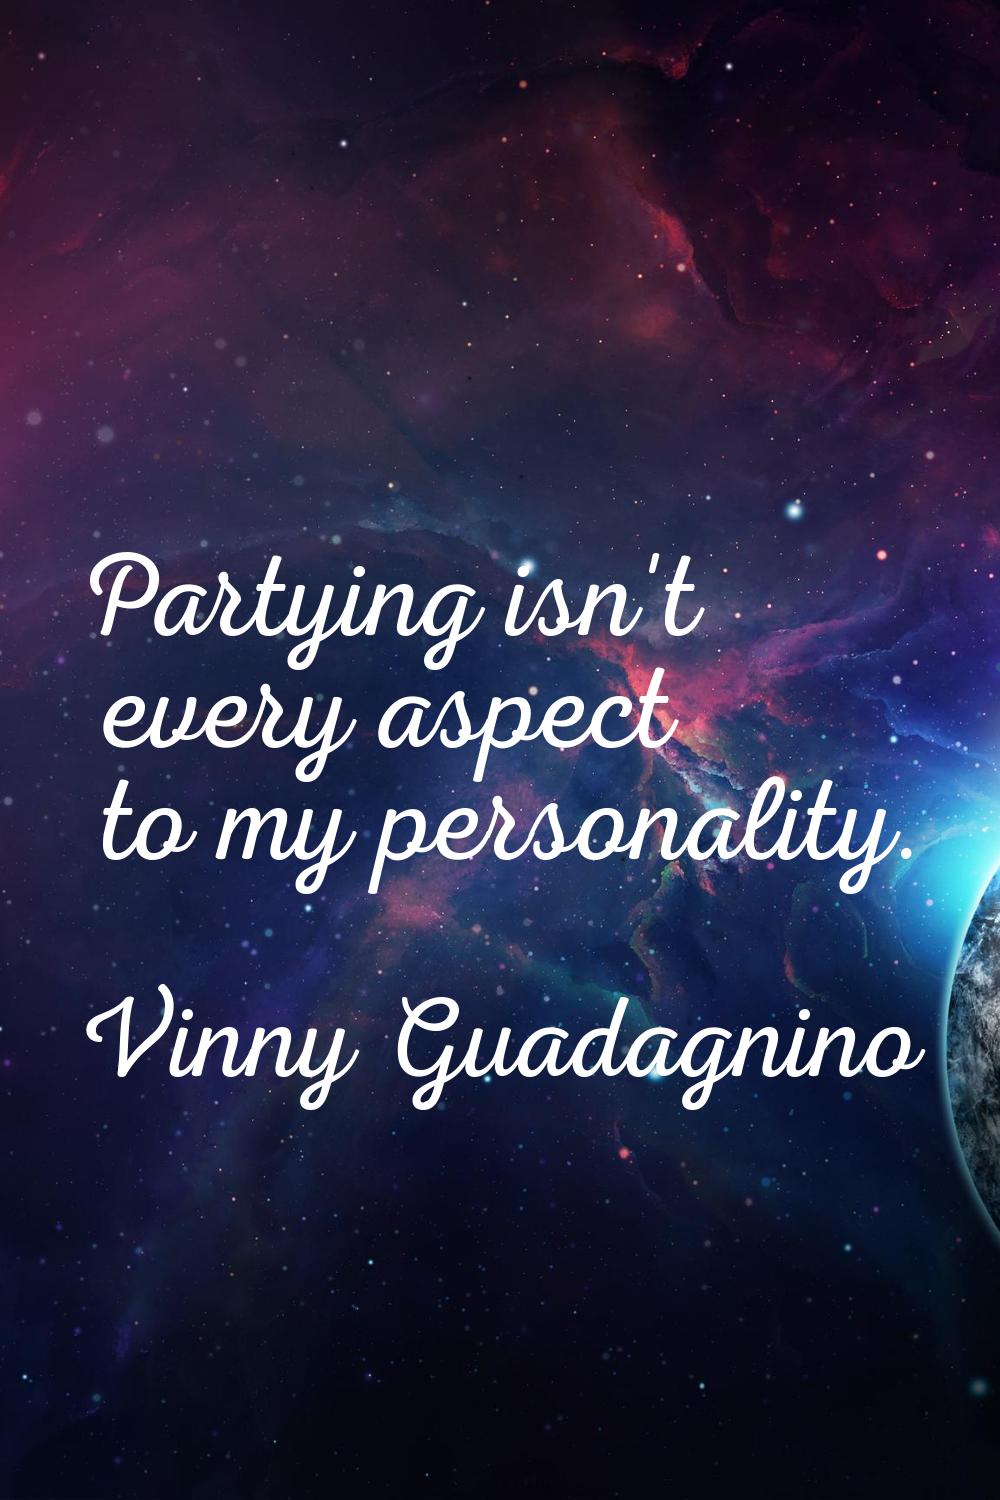 Partying isn't every aspect to my personality.